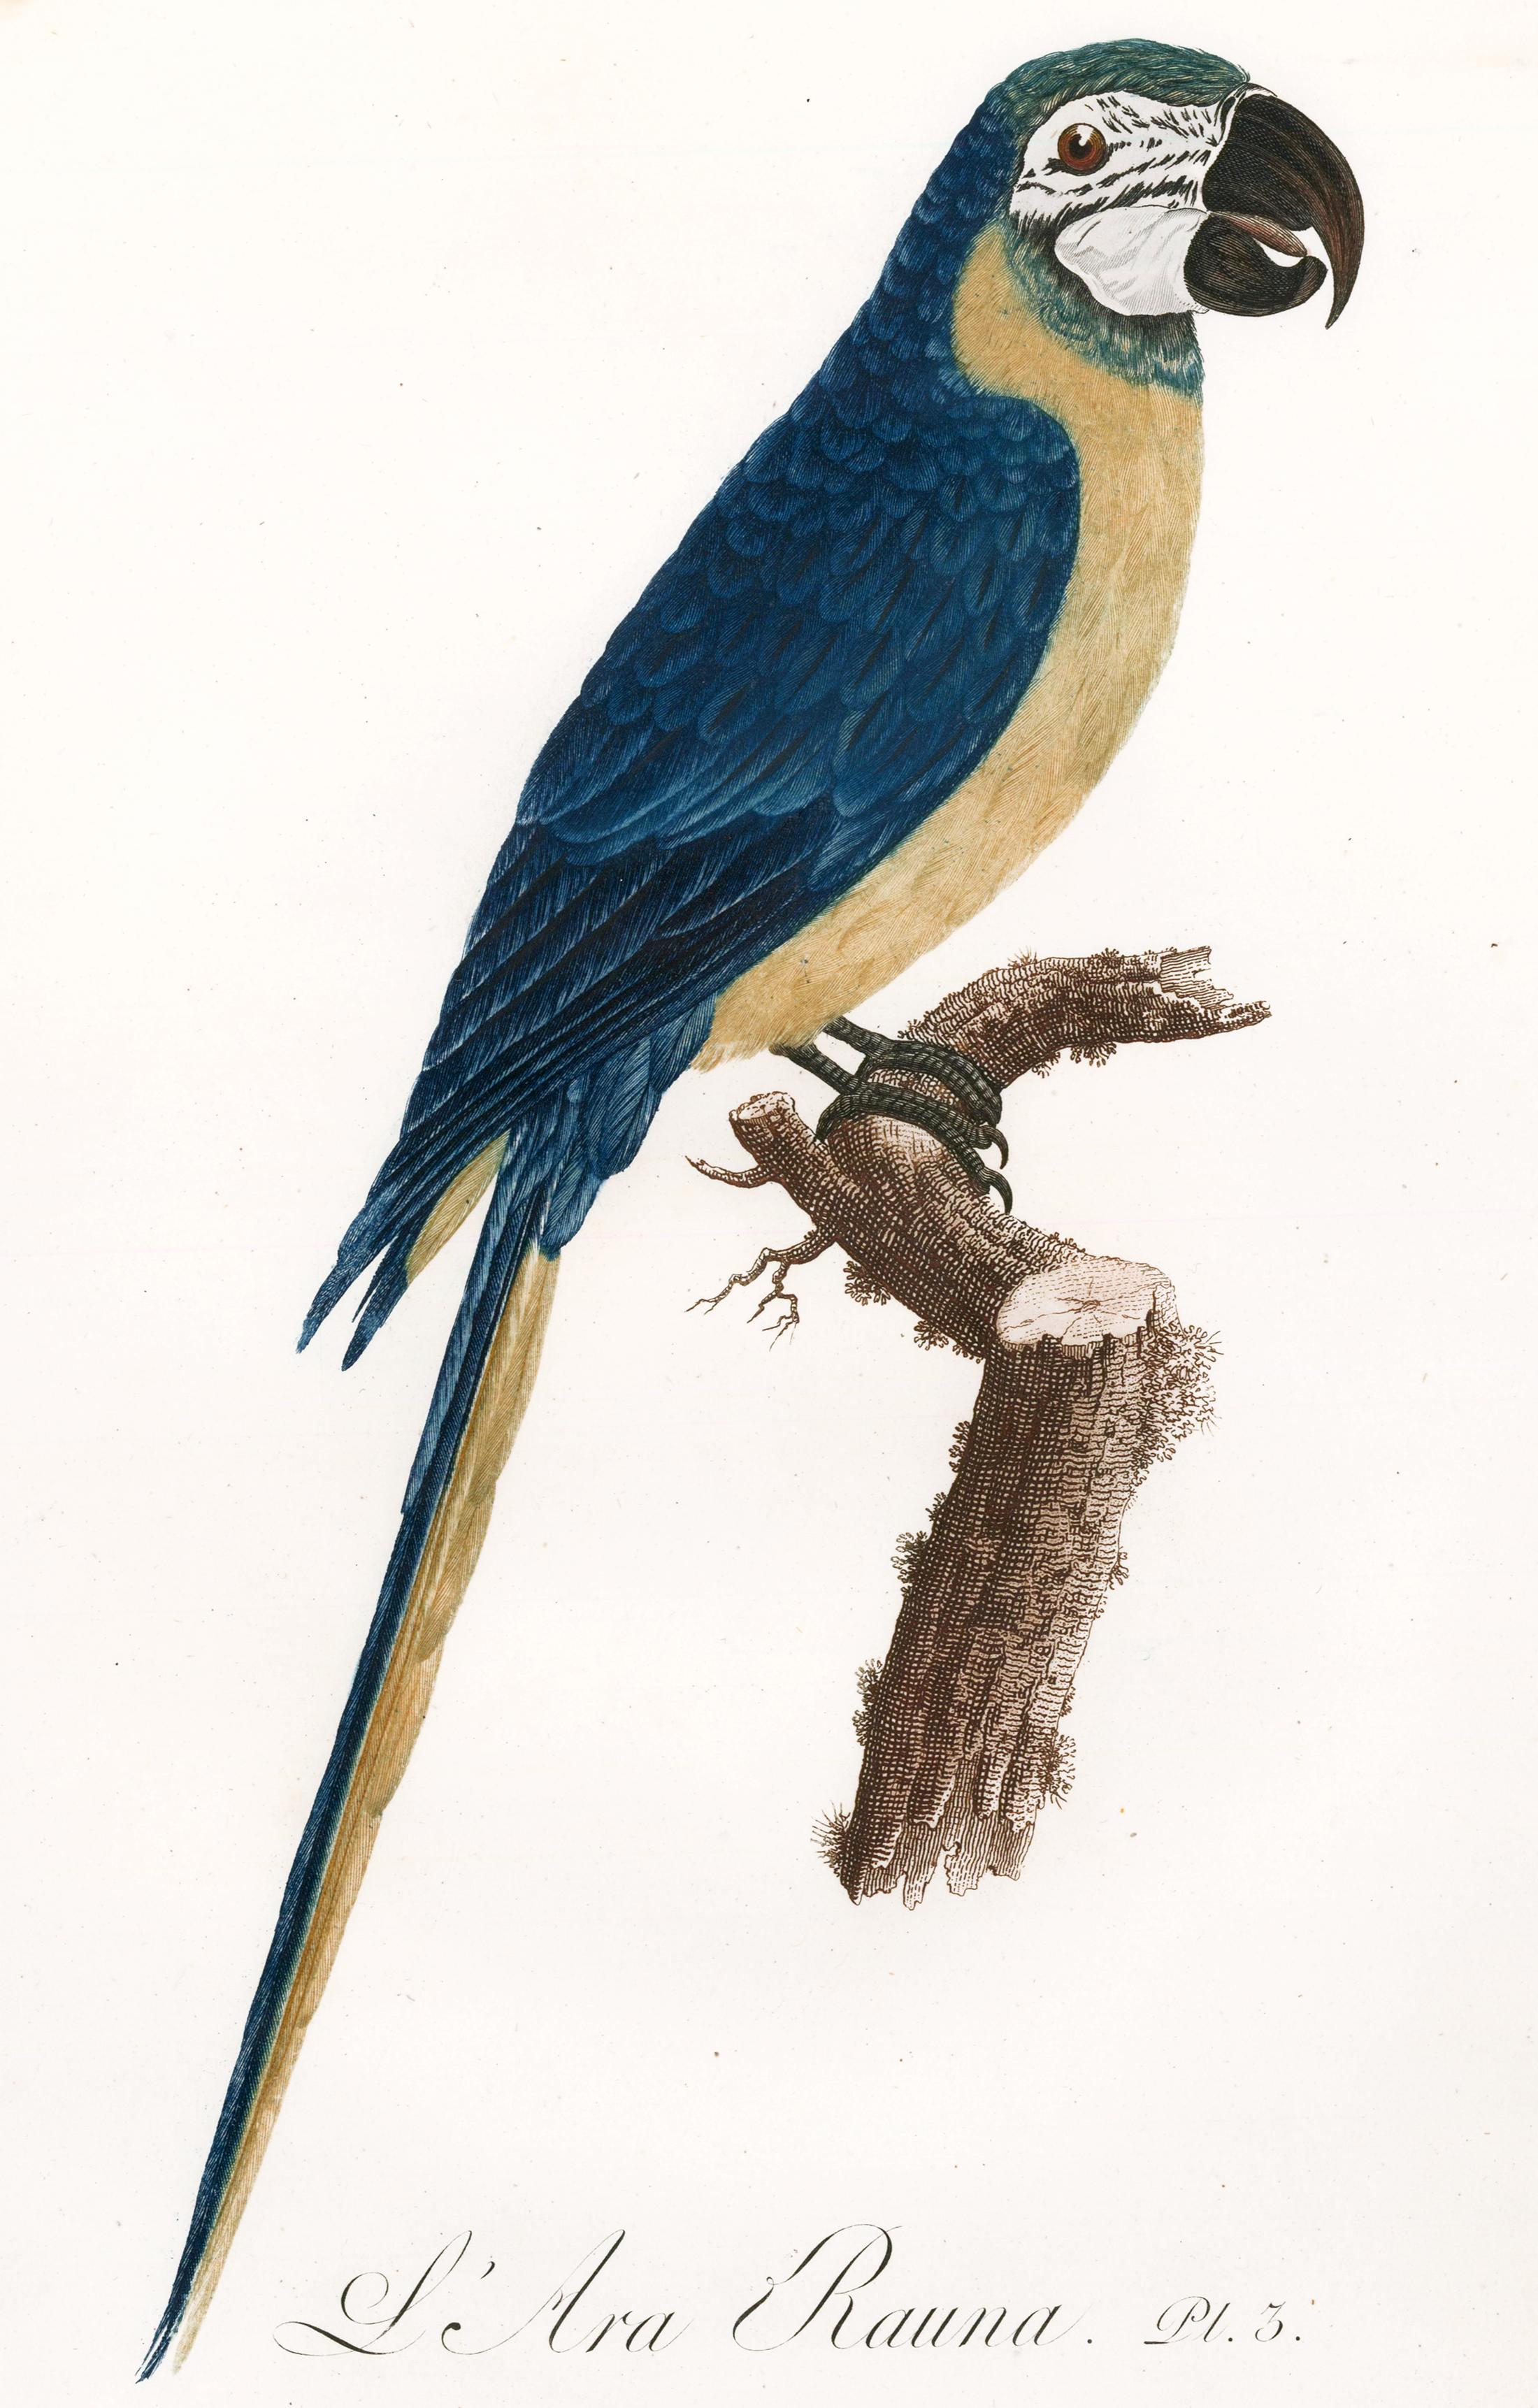 Jacques Barraband Animal Print - L'Are Rauna (Blue and Yellow Macaw)